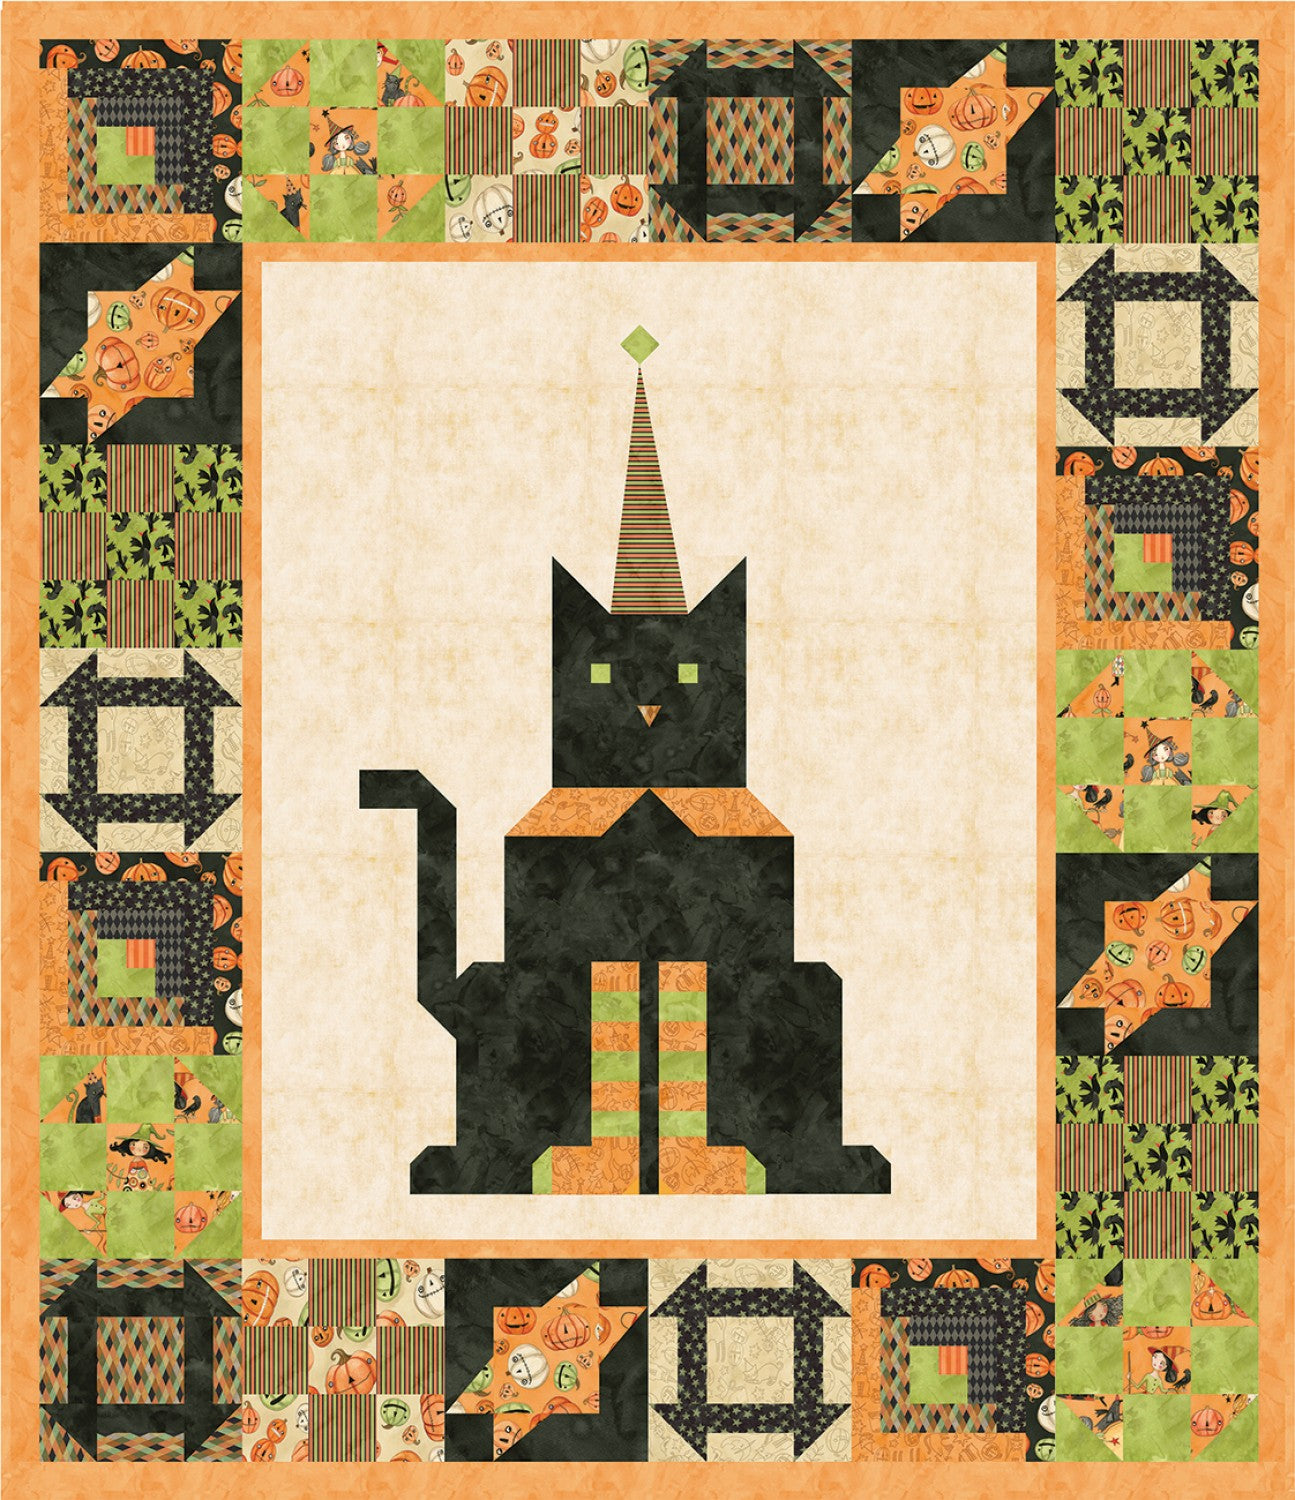 Halloween Whimsy by Teresa Kogut Purrfect Halloween KT-11820 Kit Boxed Quilt Kit  USA Shipping Included in Price